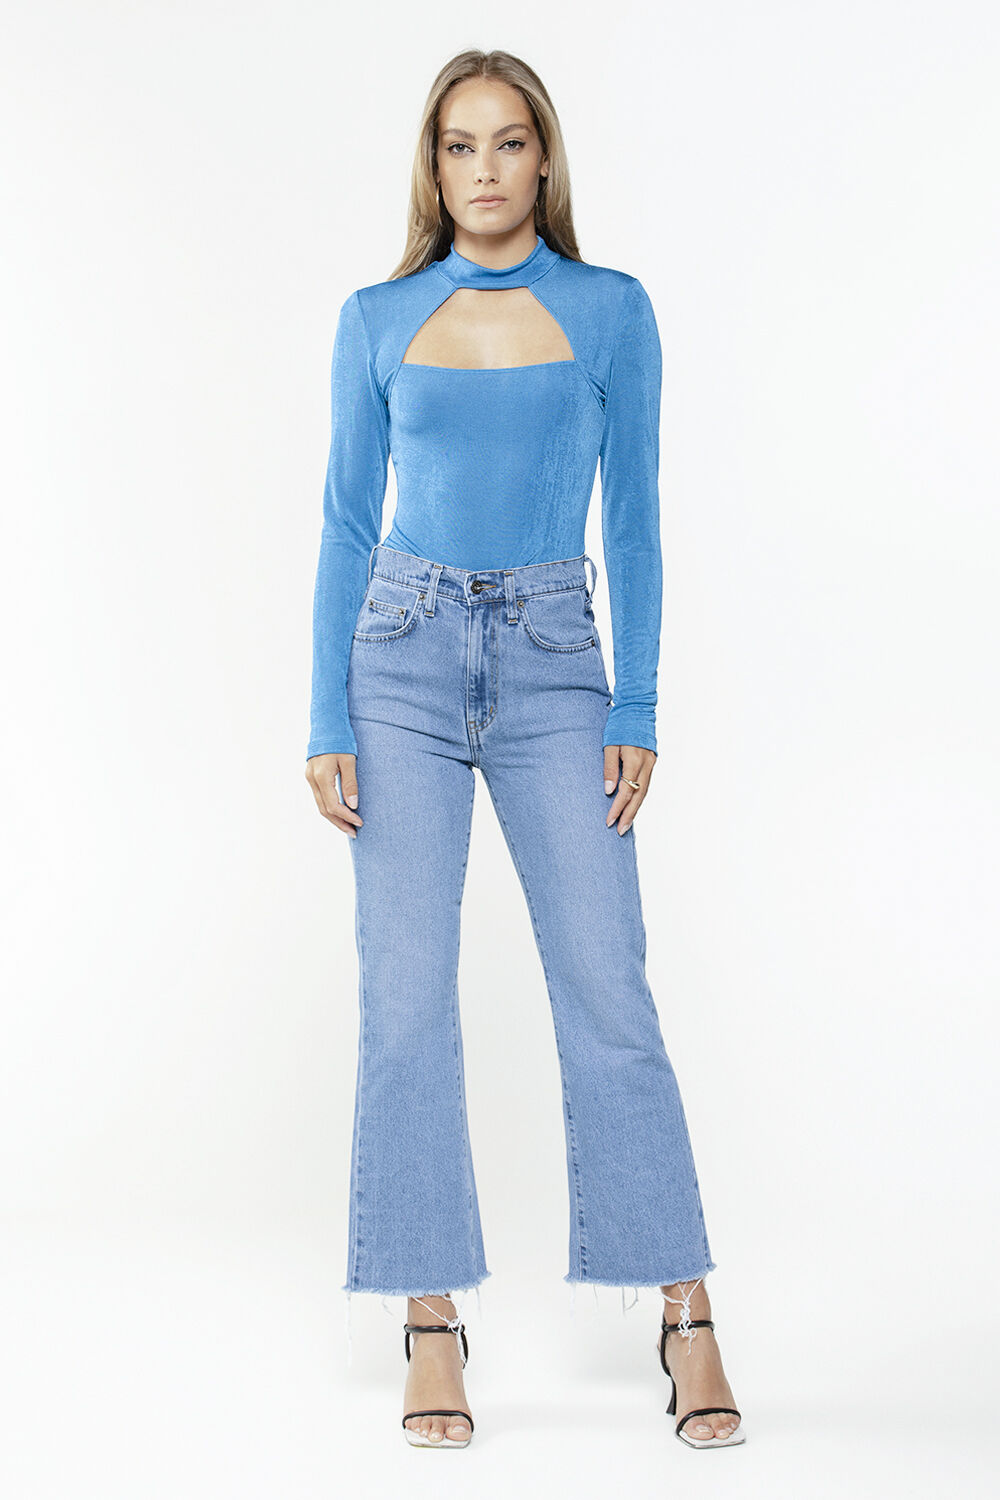 HANNA CUT OUT TOP in colour BRIGHT COBALT